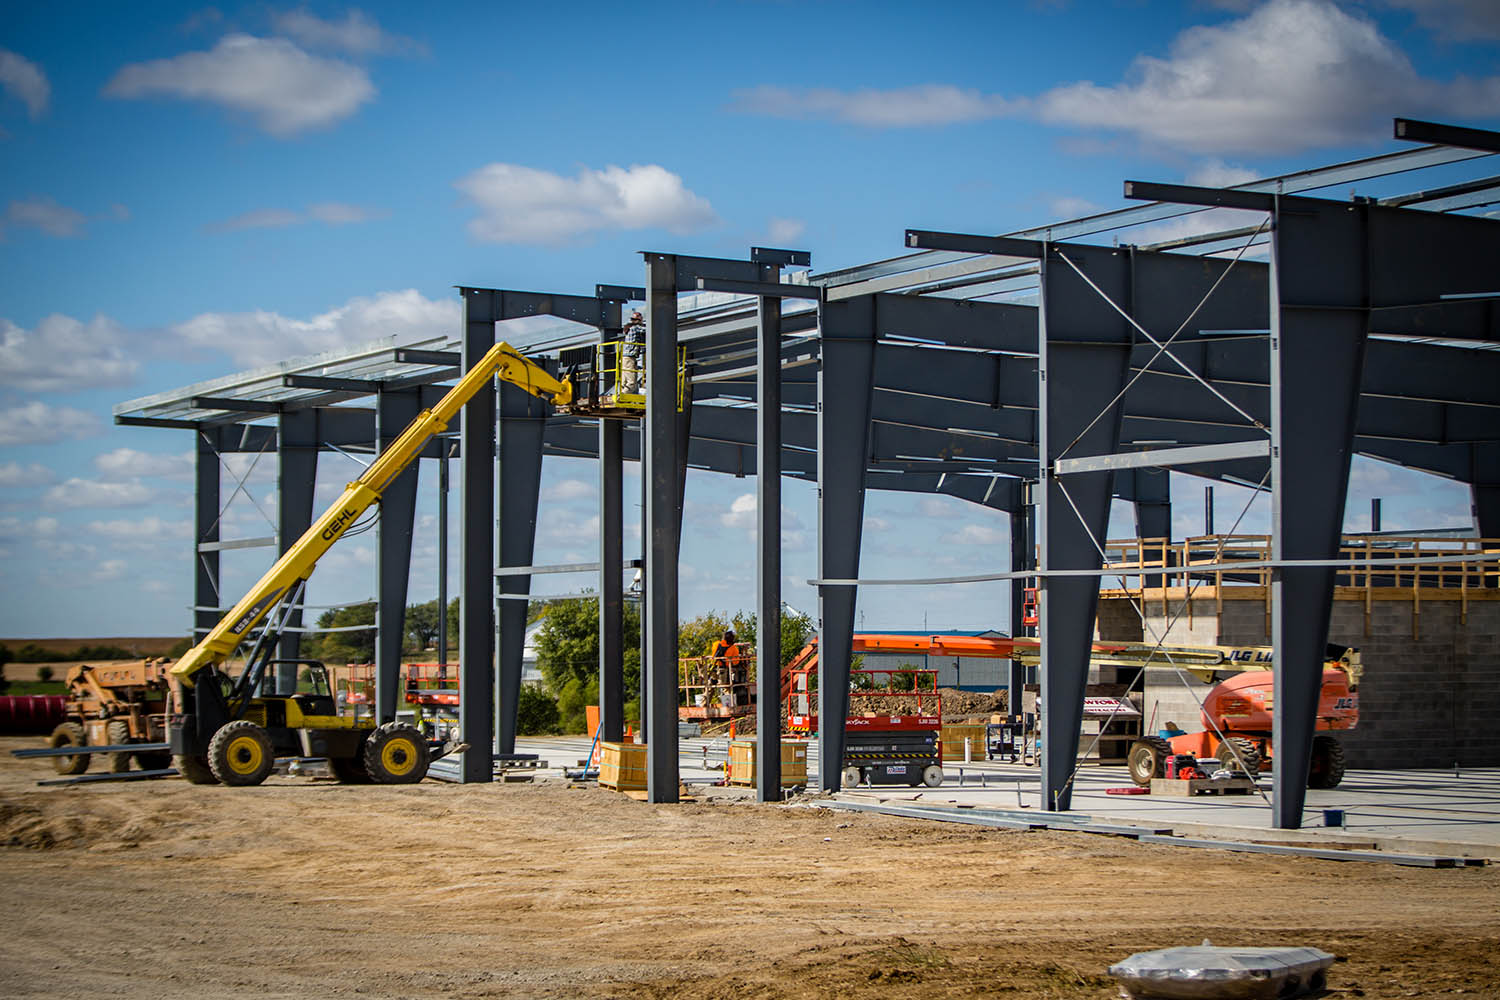 The 29,000-square-foot Agricultural Learning Center, on which Northwest broke ground in April, is being constructed at the R.T. Wright Farm. Its completion is projected in spring 2021. (Photo by Brandon Bland/Northwest Missouri State University)  